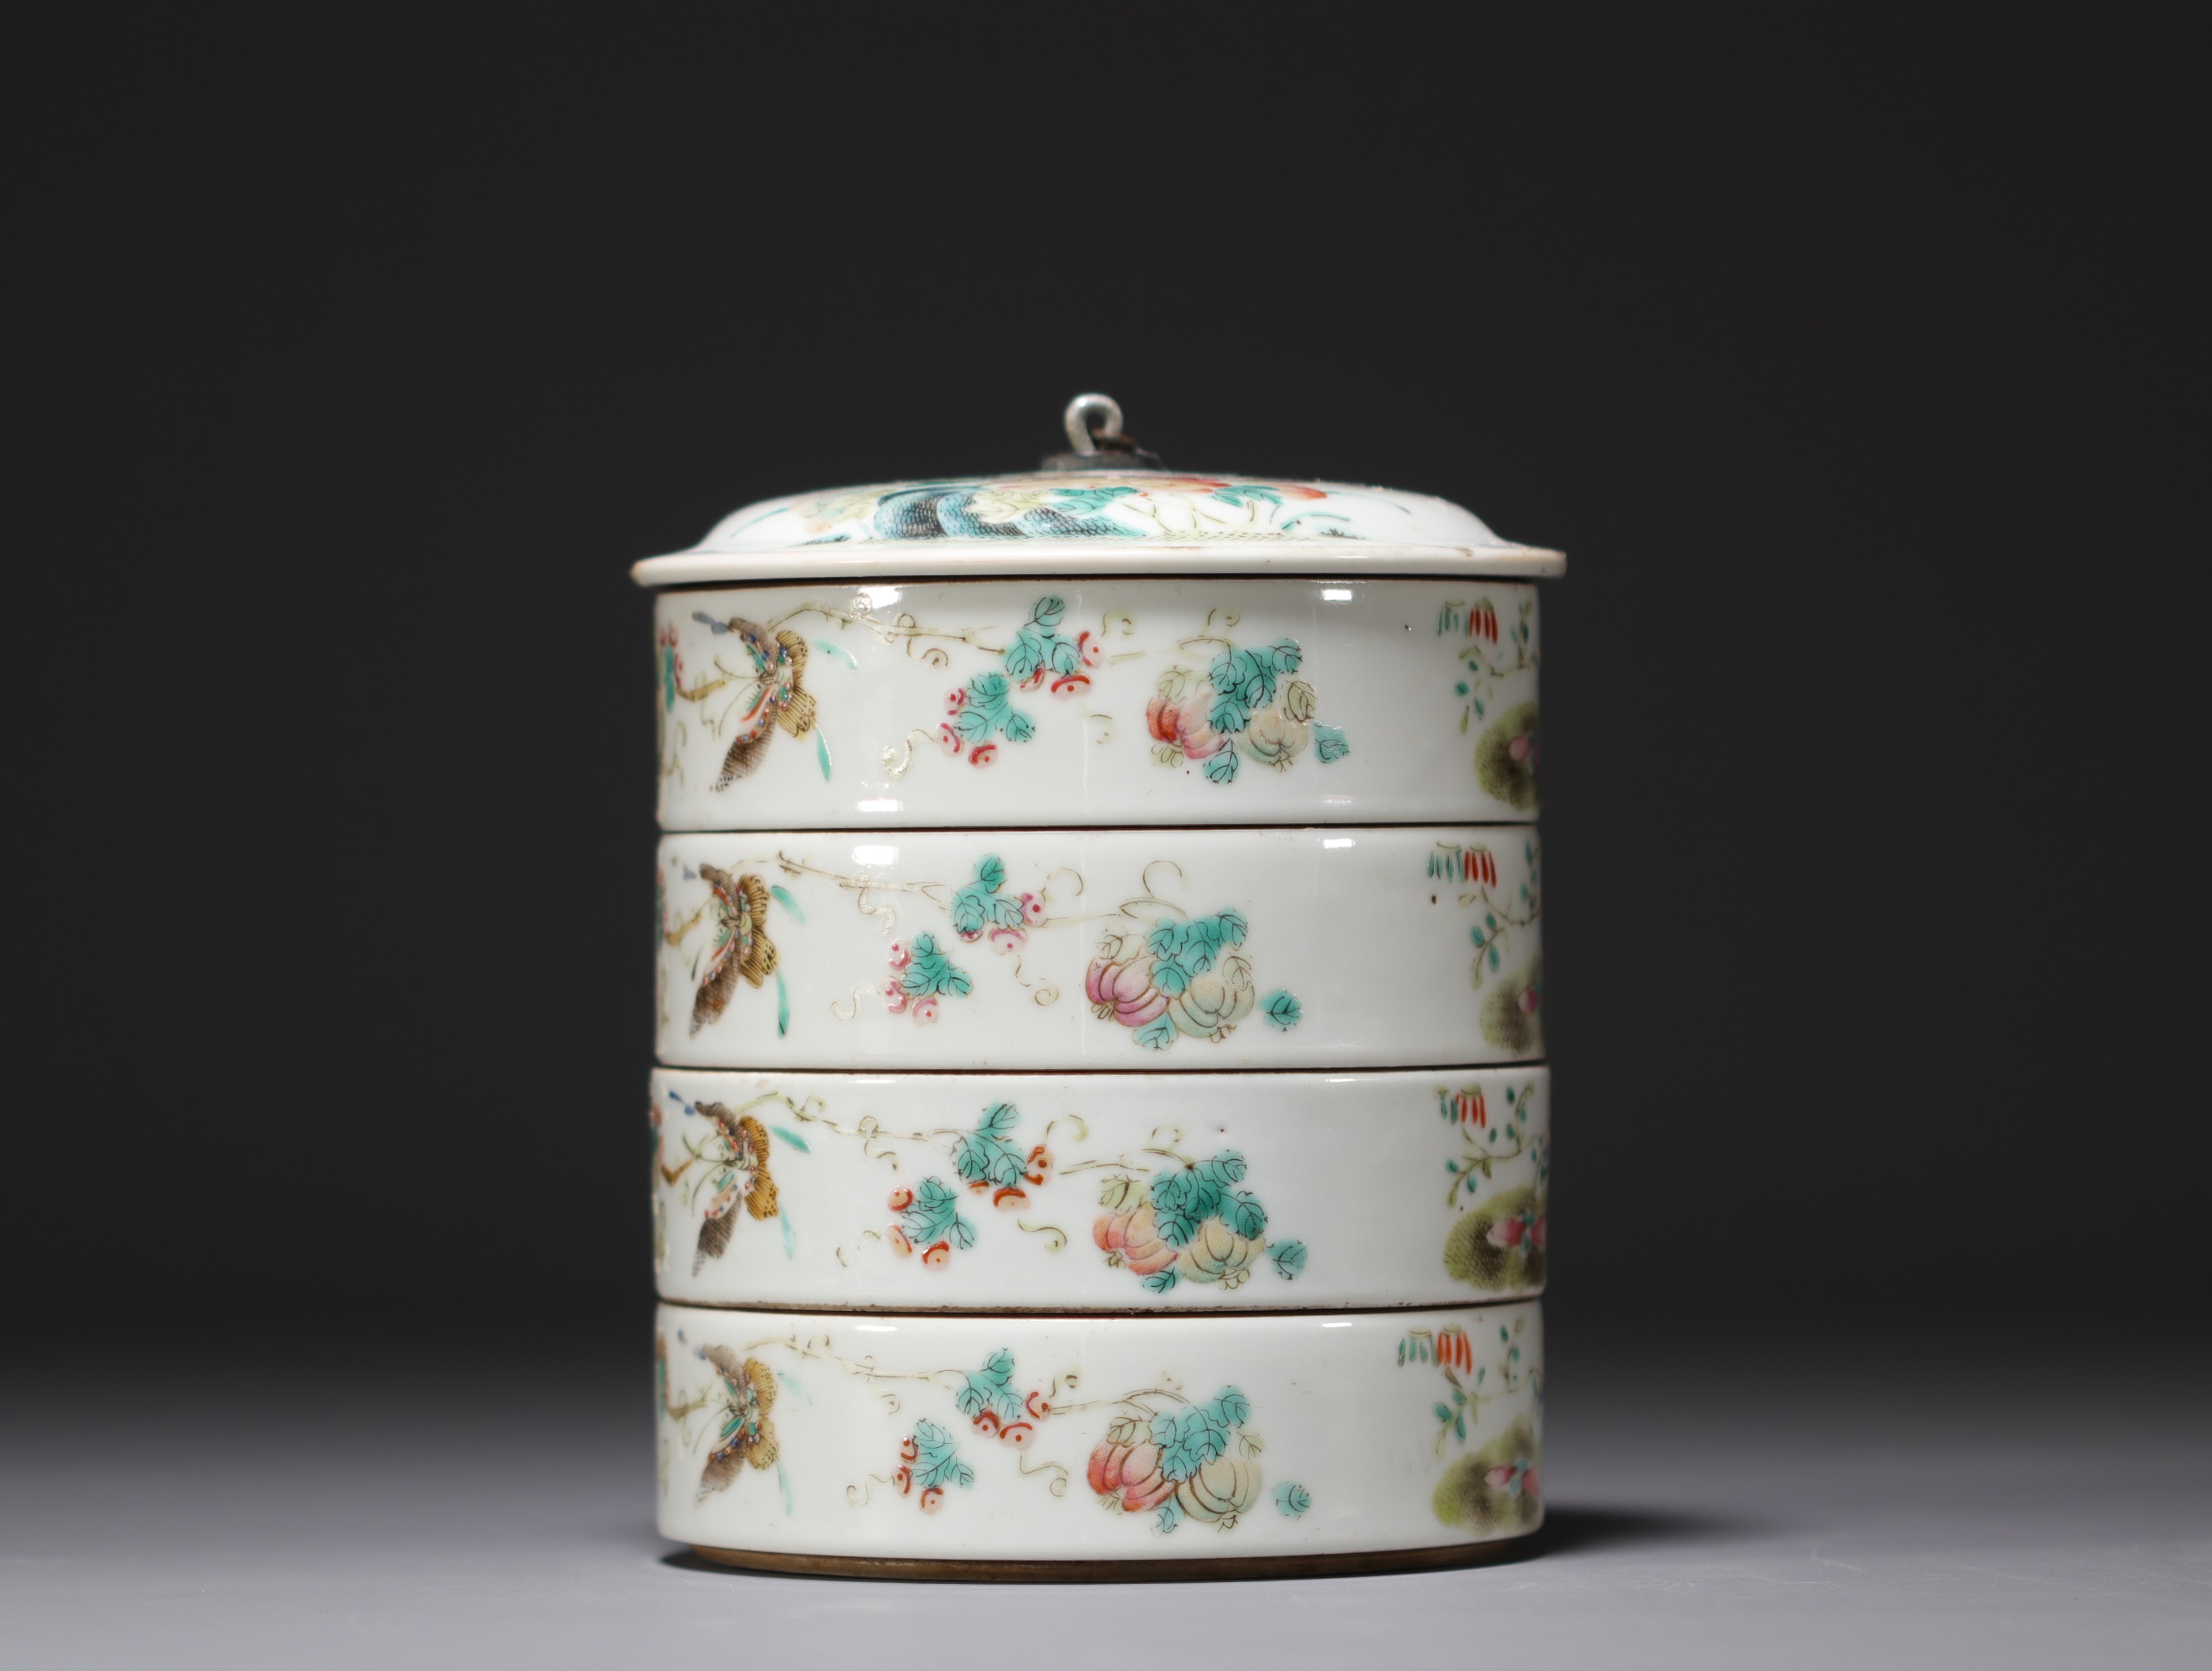 China - Set of four stacking condiment bowls decorated with flowers, famille rose. - Image 4 of 6